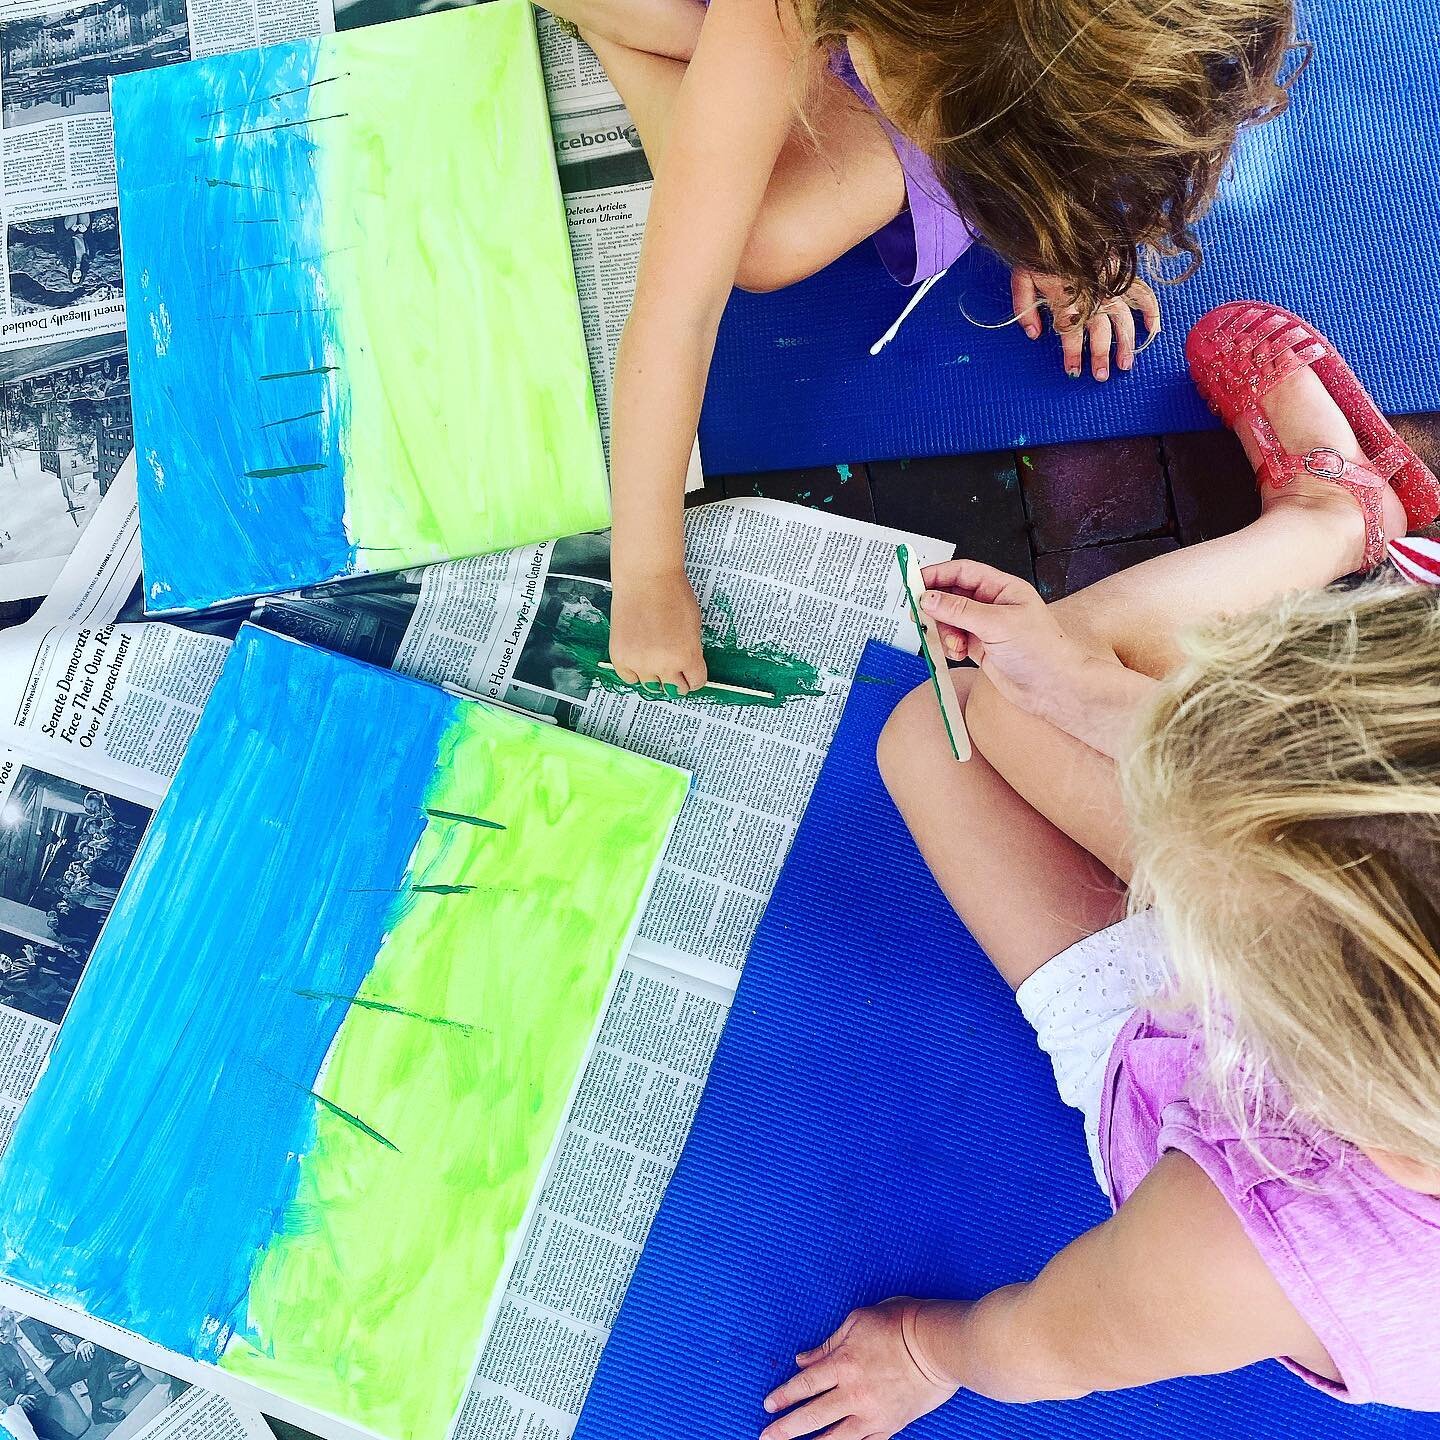 painting with popsicle sticks 🎨🌺😎

#fireflyyogis #popsiclestick